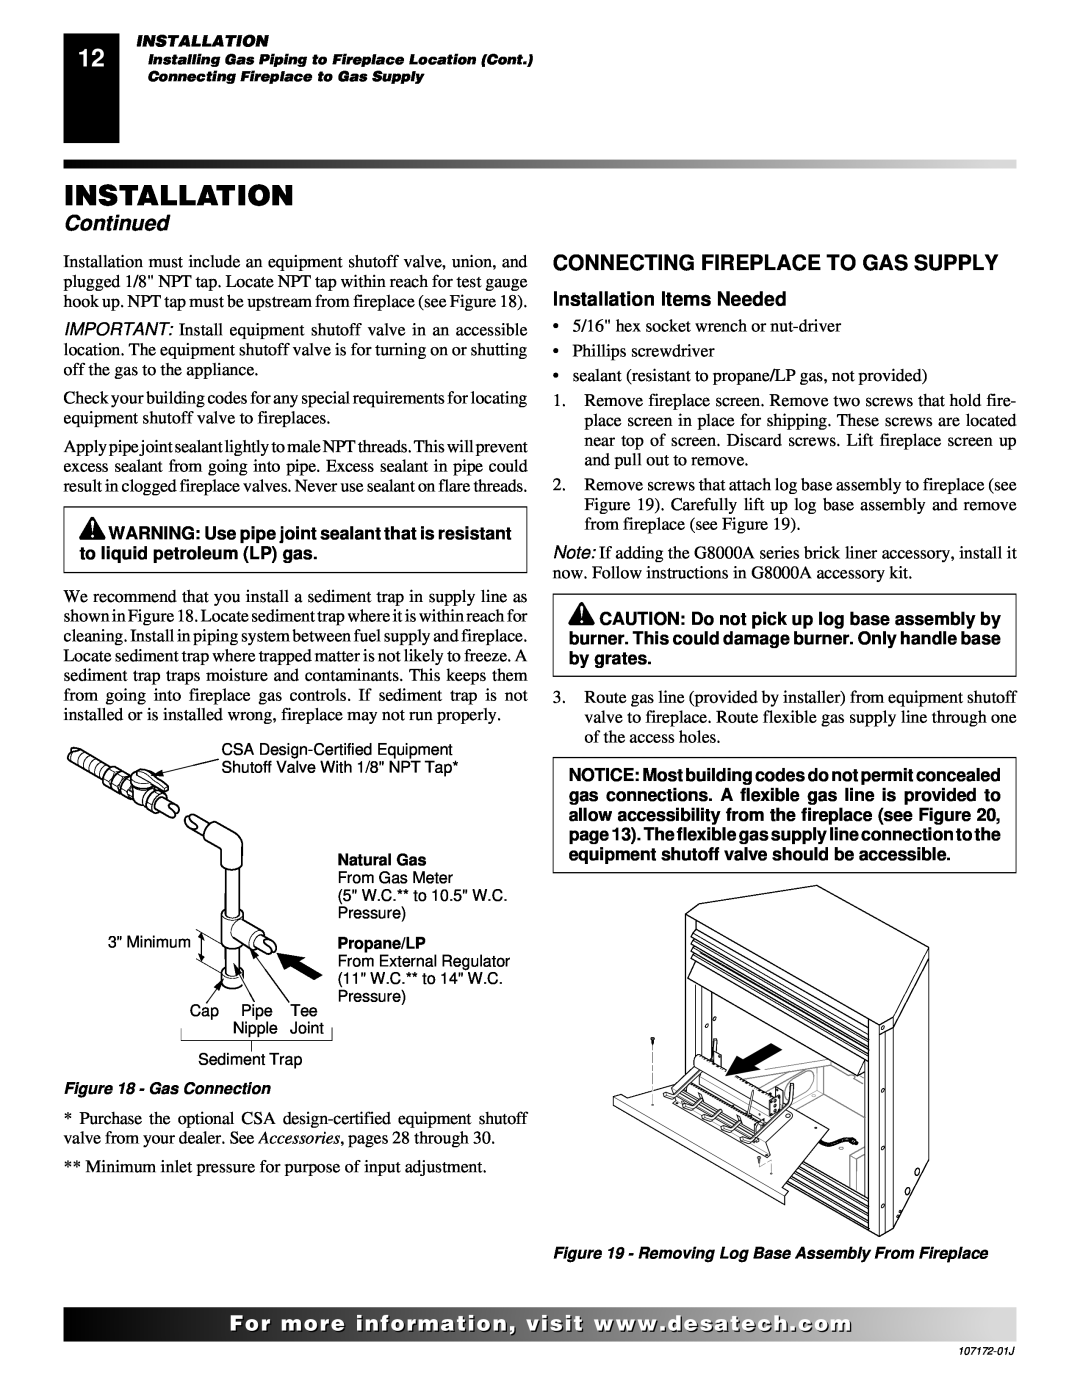 Desa EFS33PRA installation manual Connecting Fireplace To Gas Supply, Continued, Installation Items Needed 